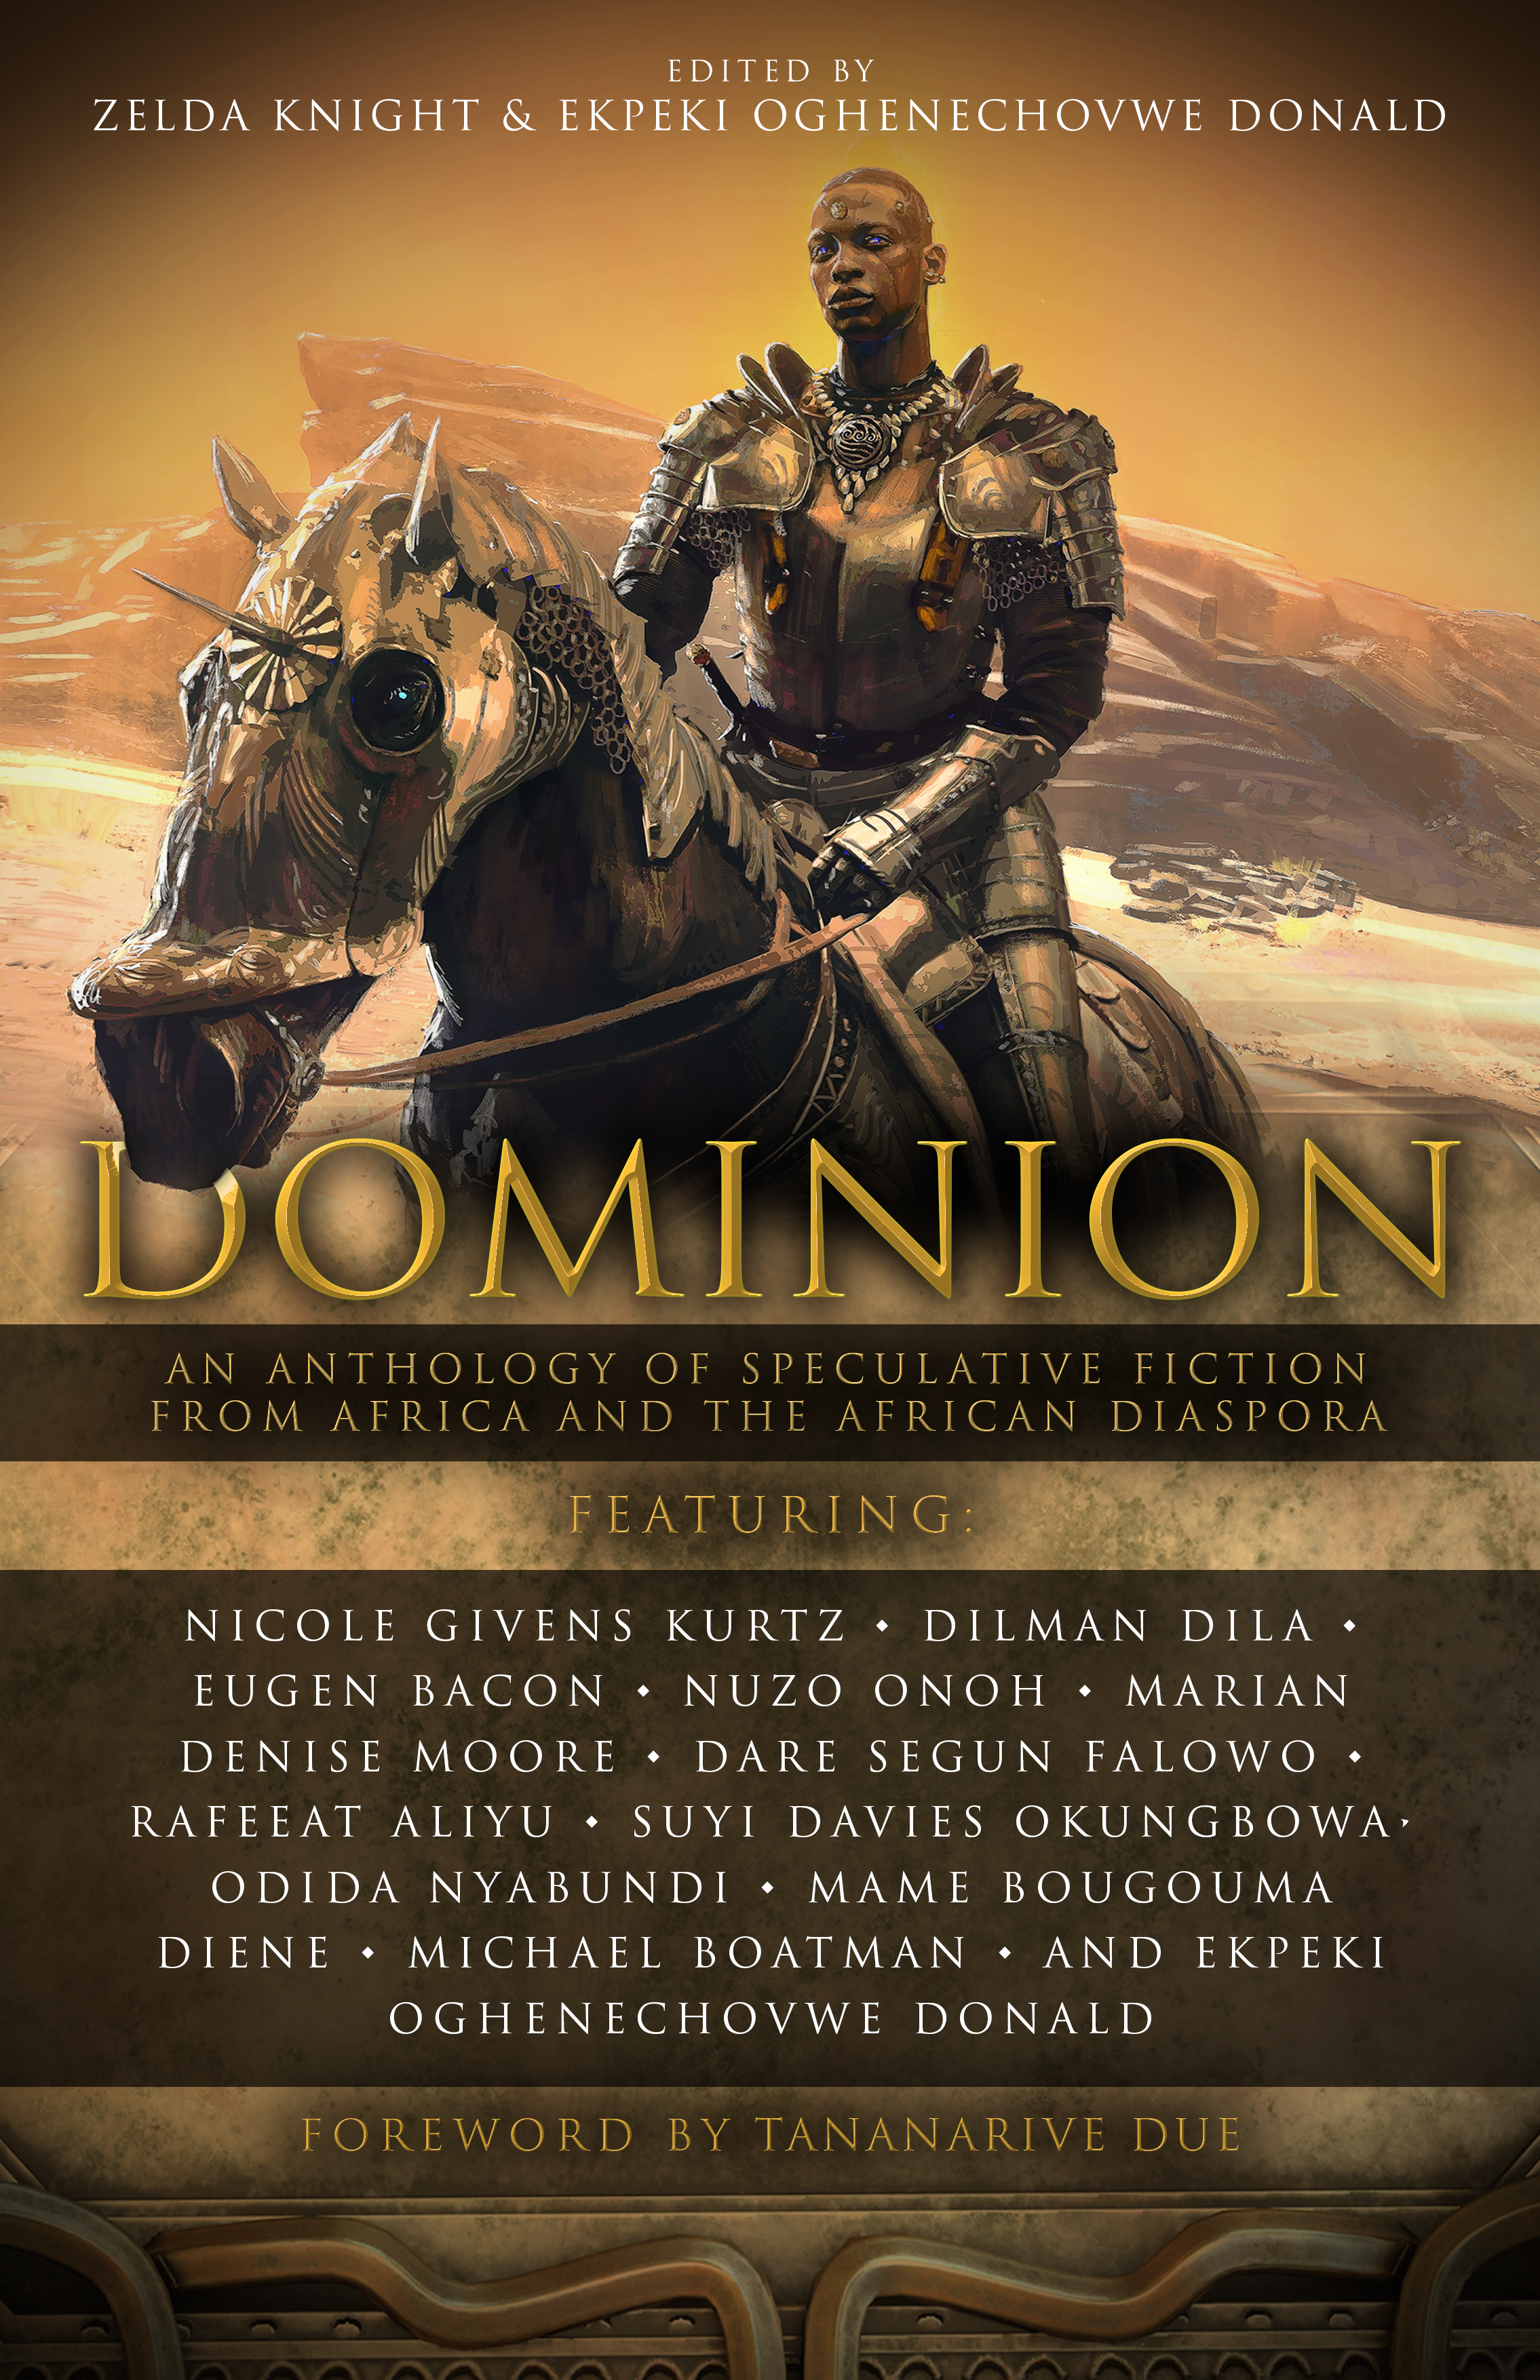 Book Review: “Dominion: An Anthology of Speculative Fiction from Africa and the African Diaspora” by Various Authors